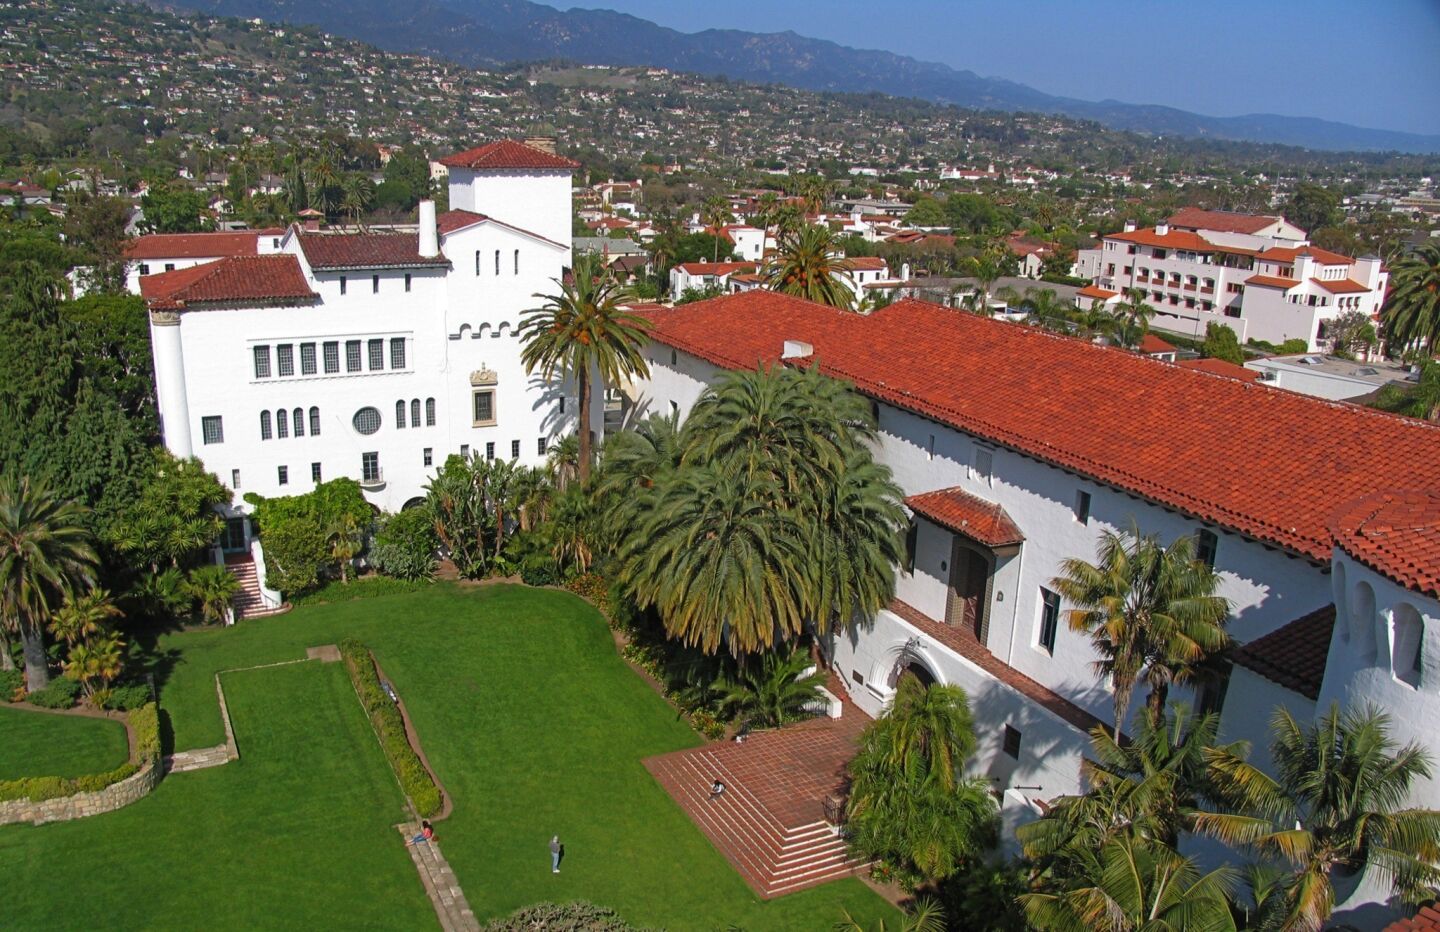 Santa Barbara's landmark county courthouse has a clock tower that visitors can climb for views of the coast and town.